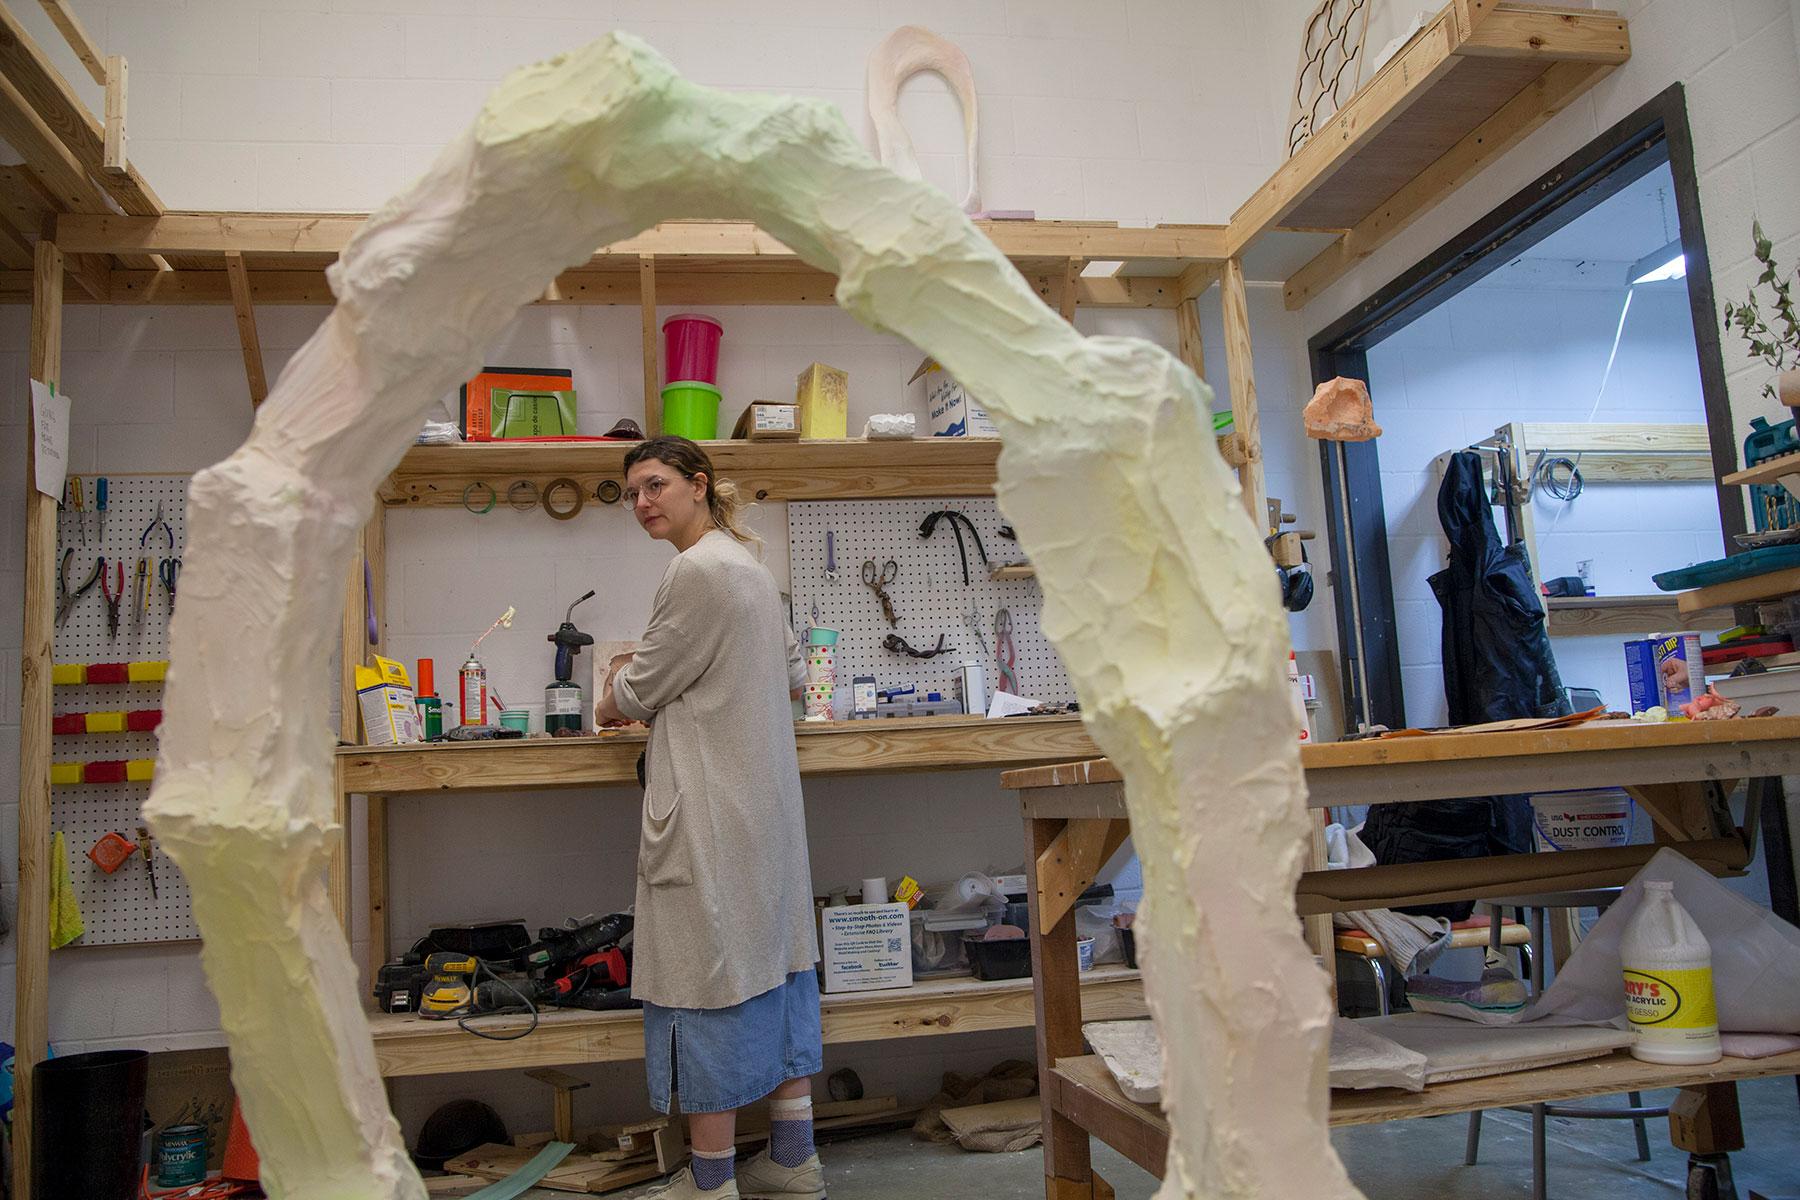 student in studio space with sculpture in foreground